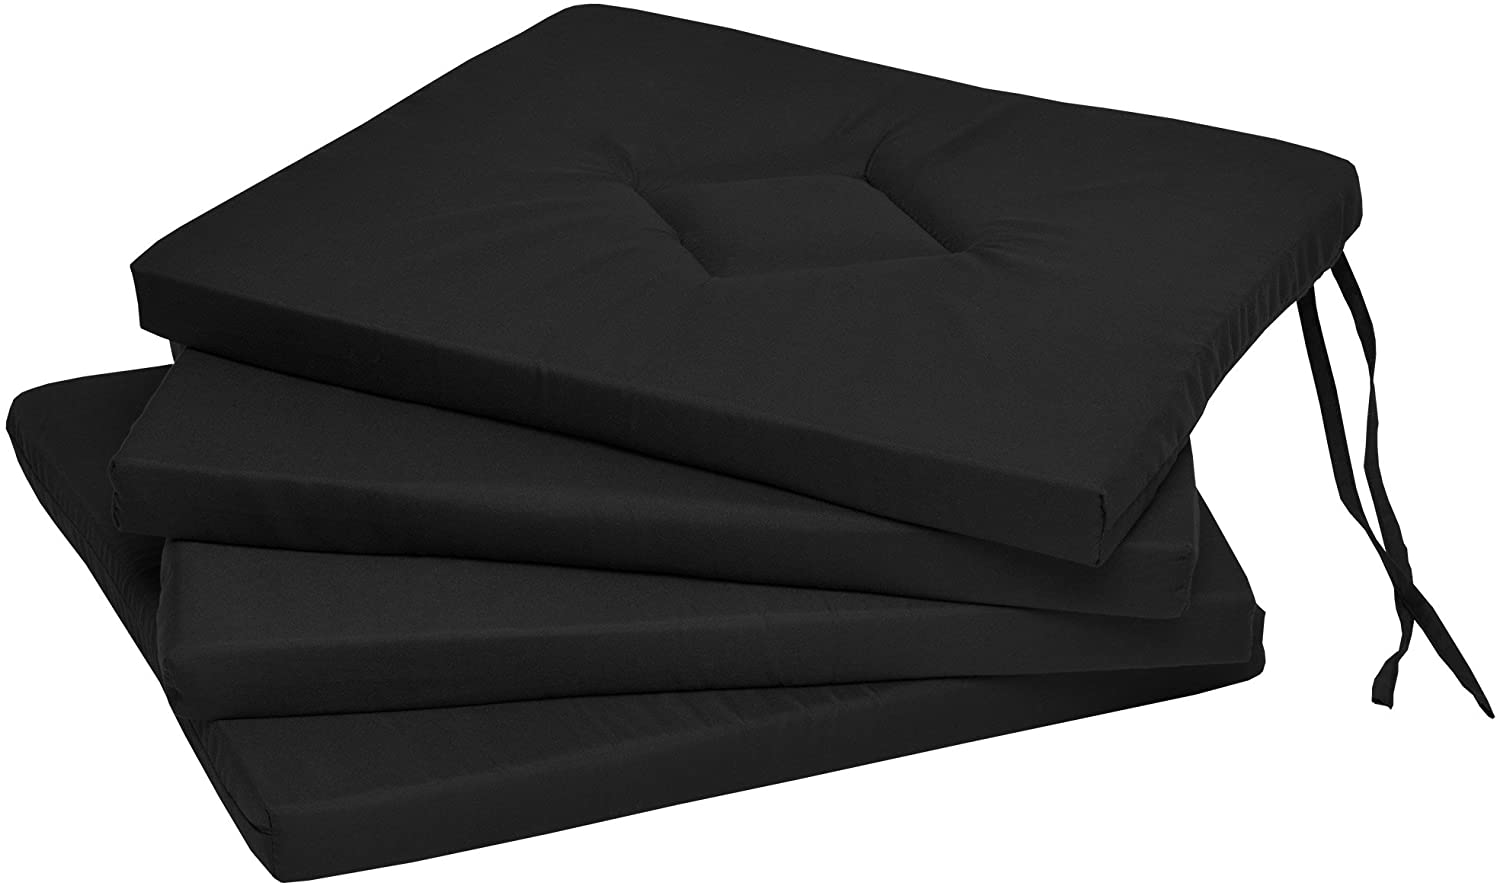 Beautissu Set Of 4 Chair Cushions, Kim, 40 X 40 X 3 Cm, For Indoor And Outd